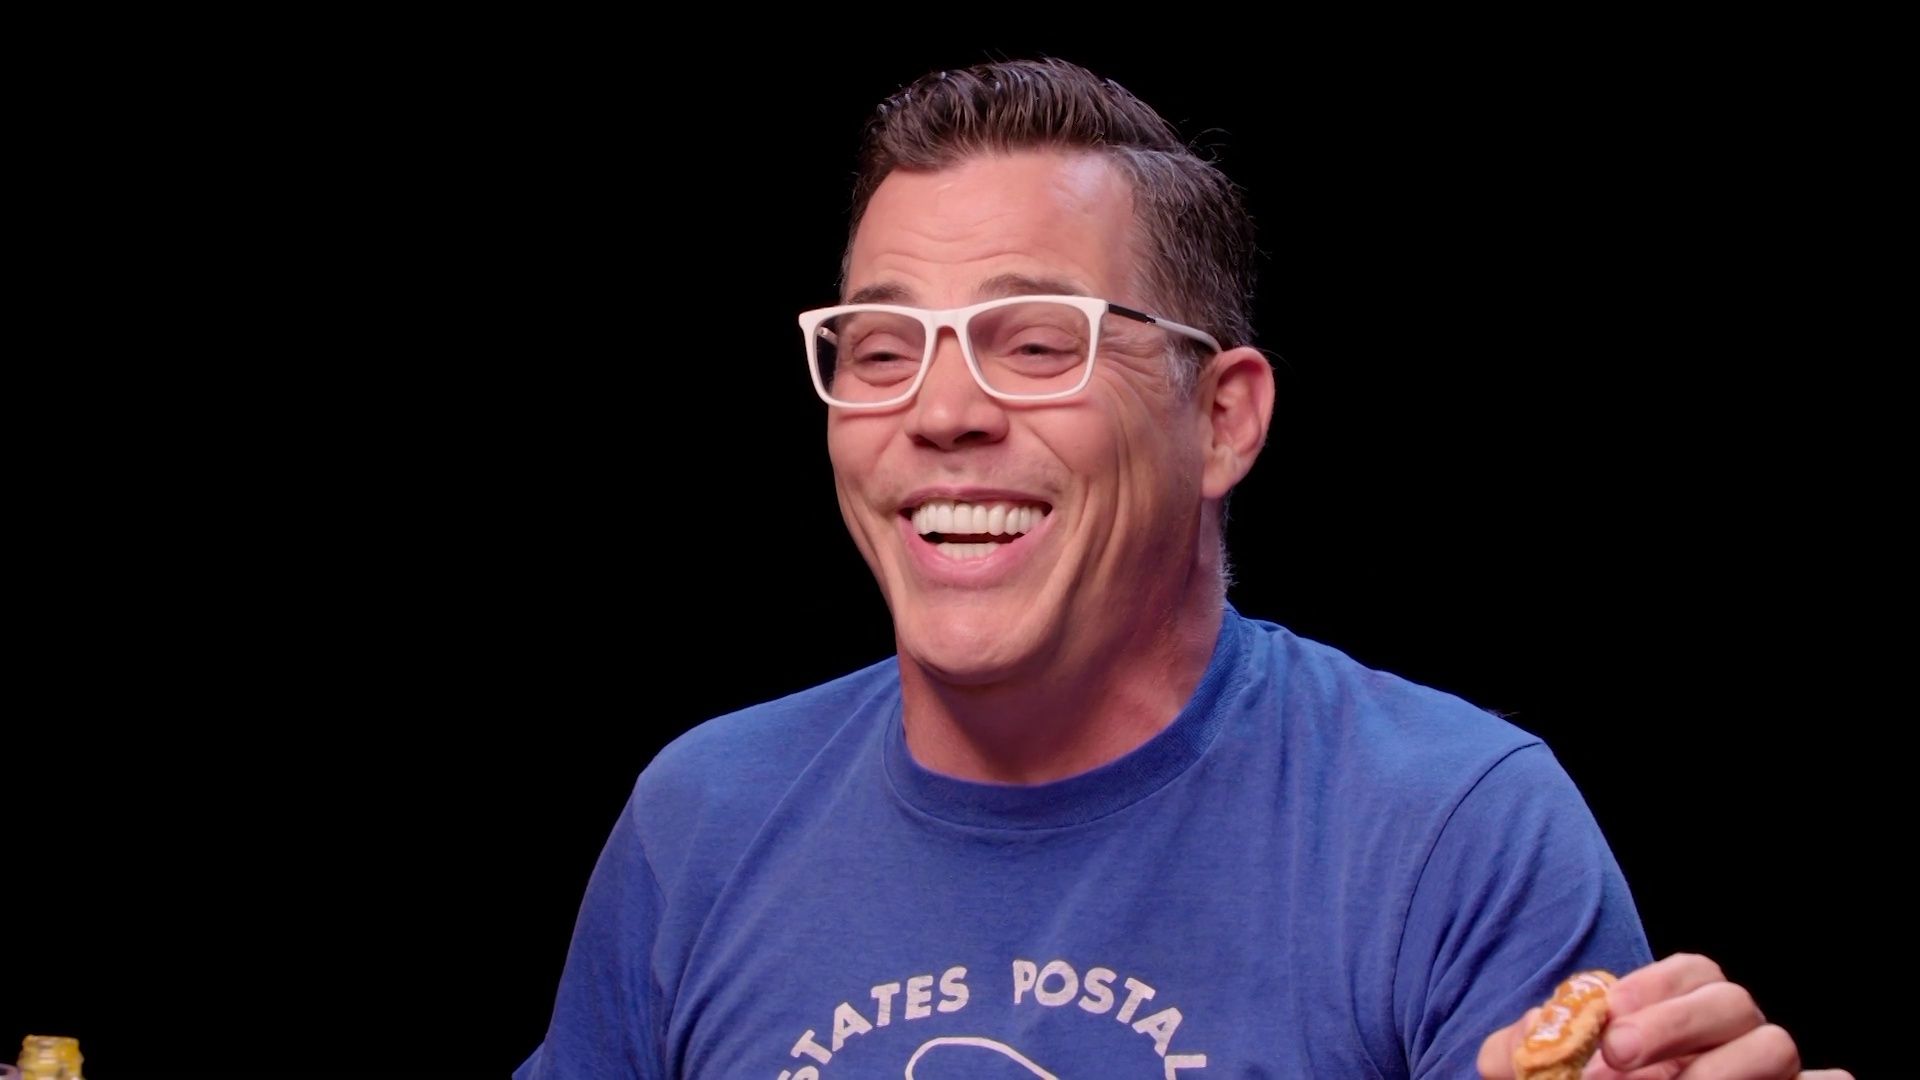 Steve-O Takes It Too Far While Eating Spicy Wings